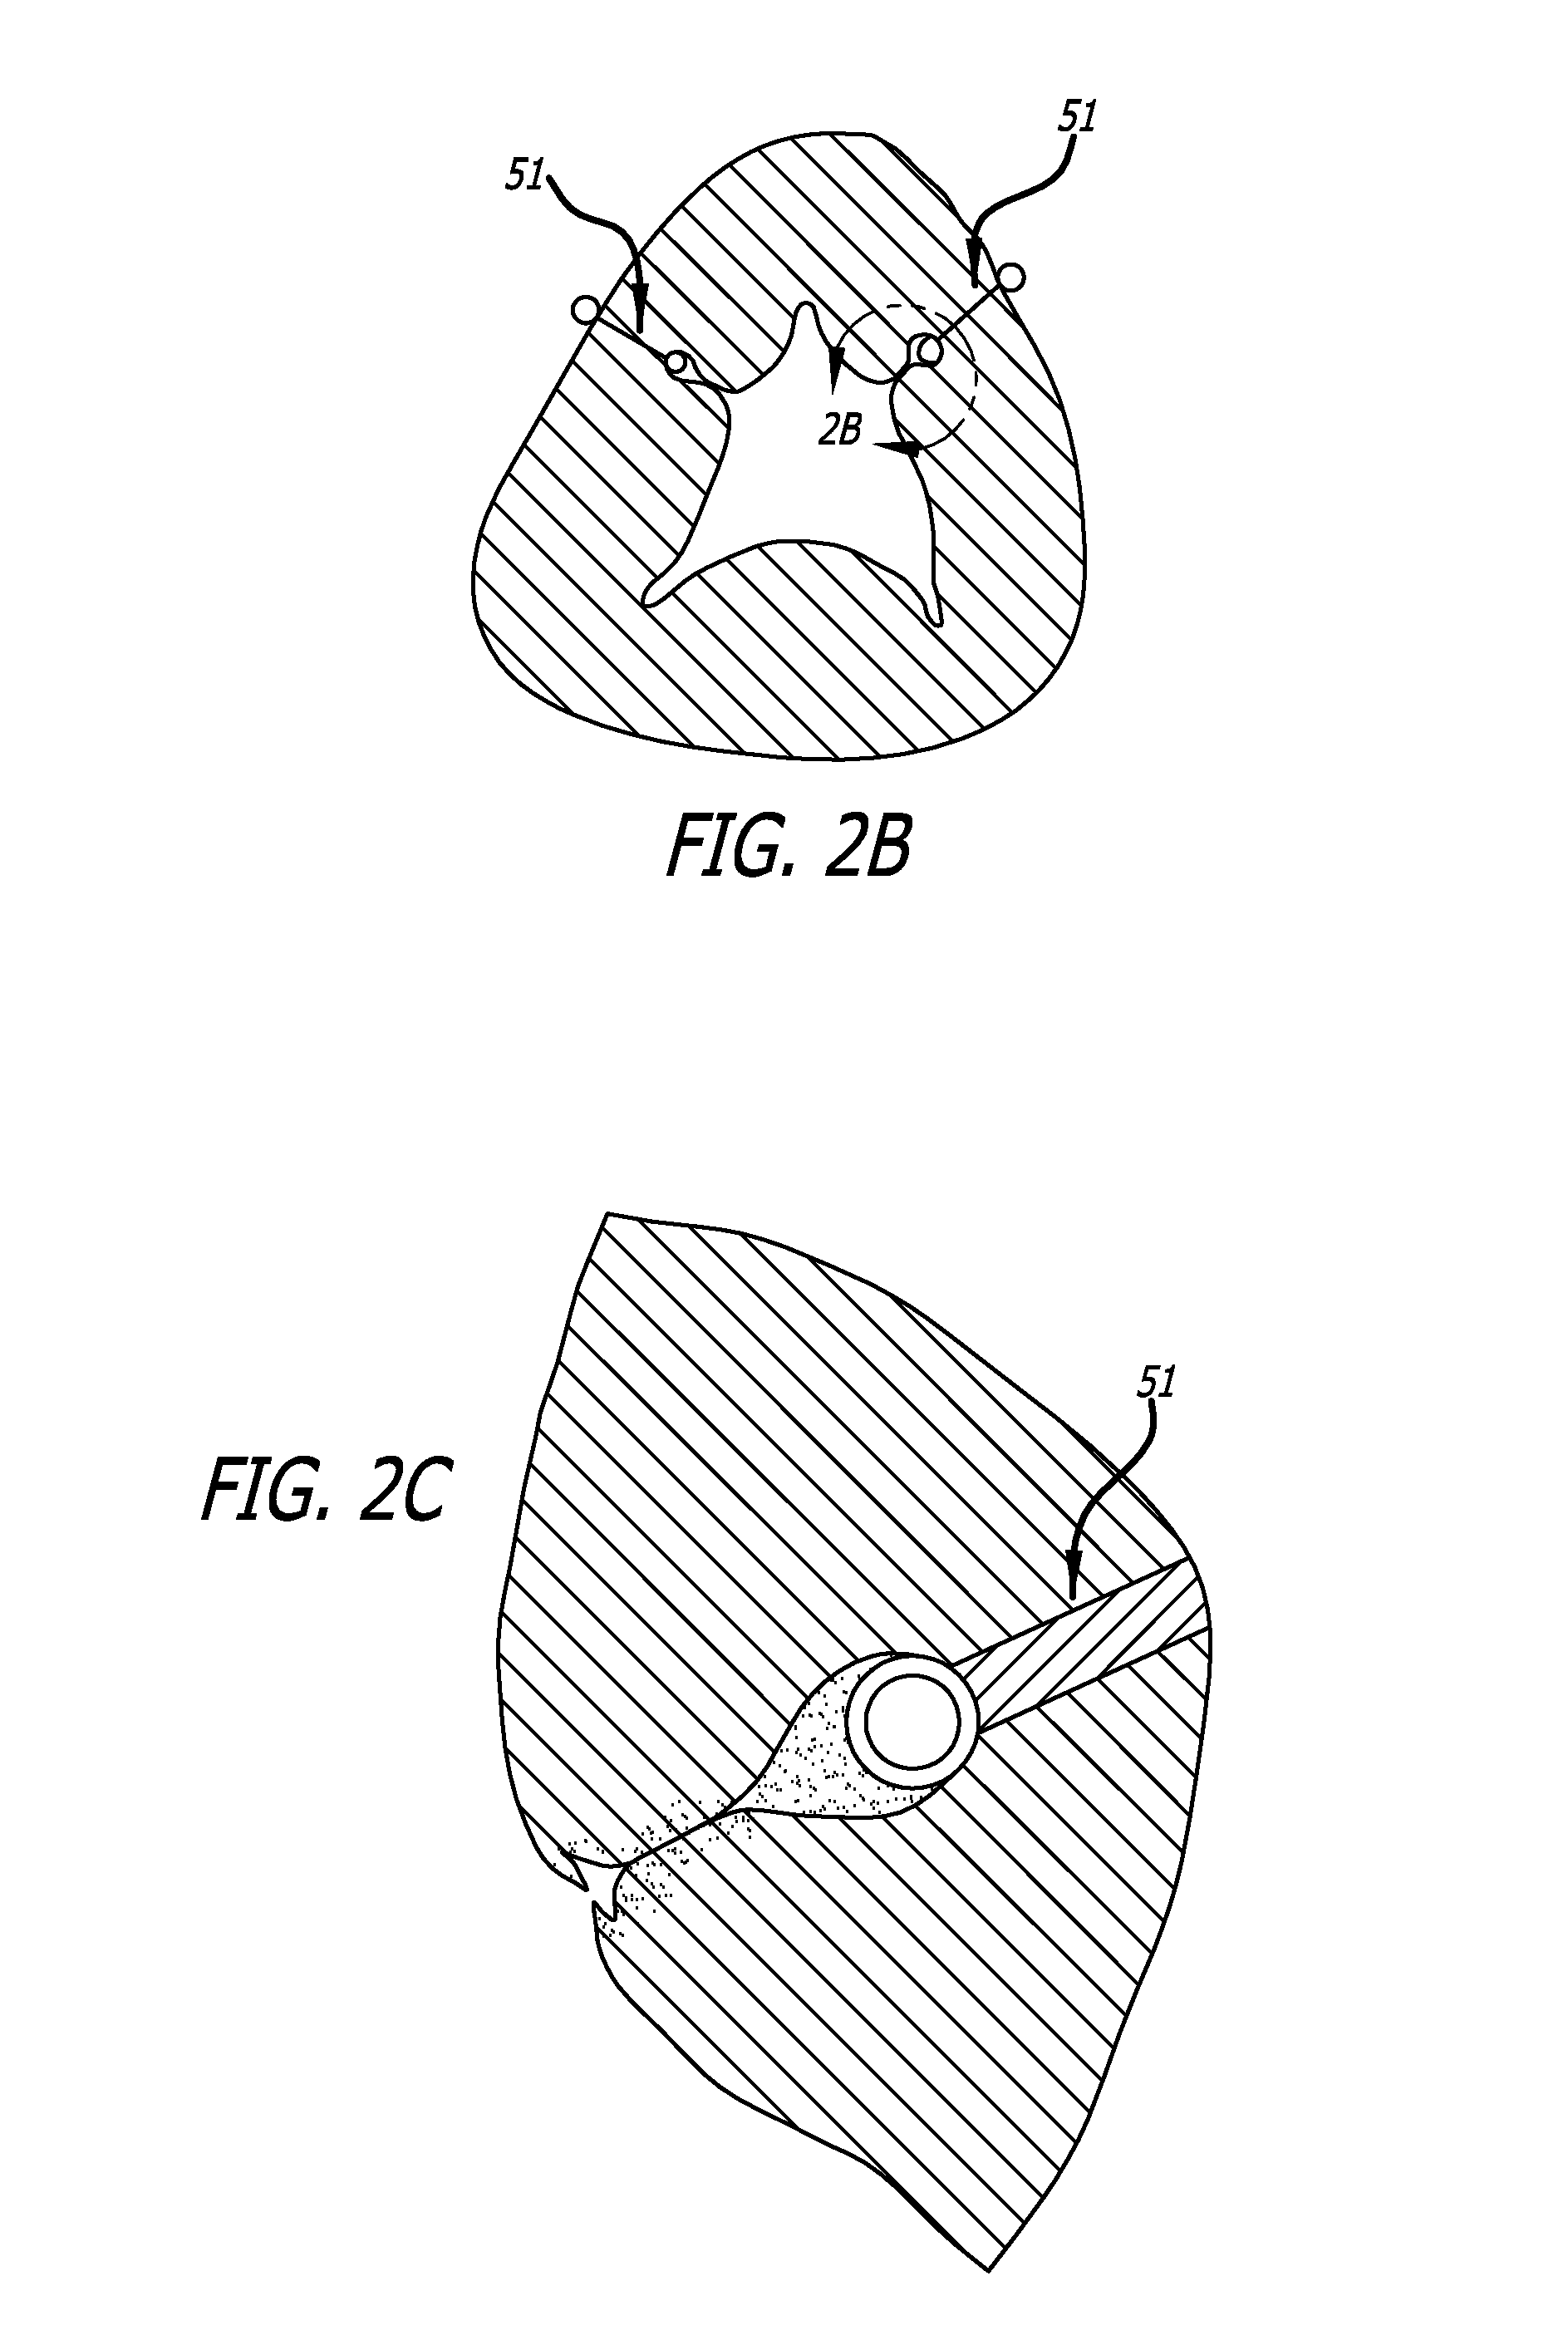 Integrated handle assembly for anchor delivery system